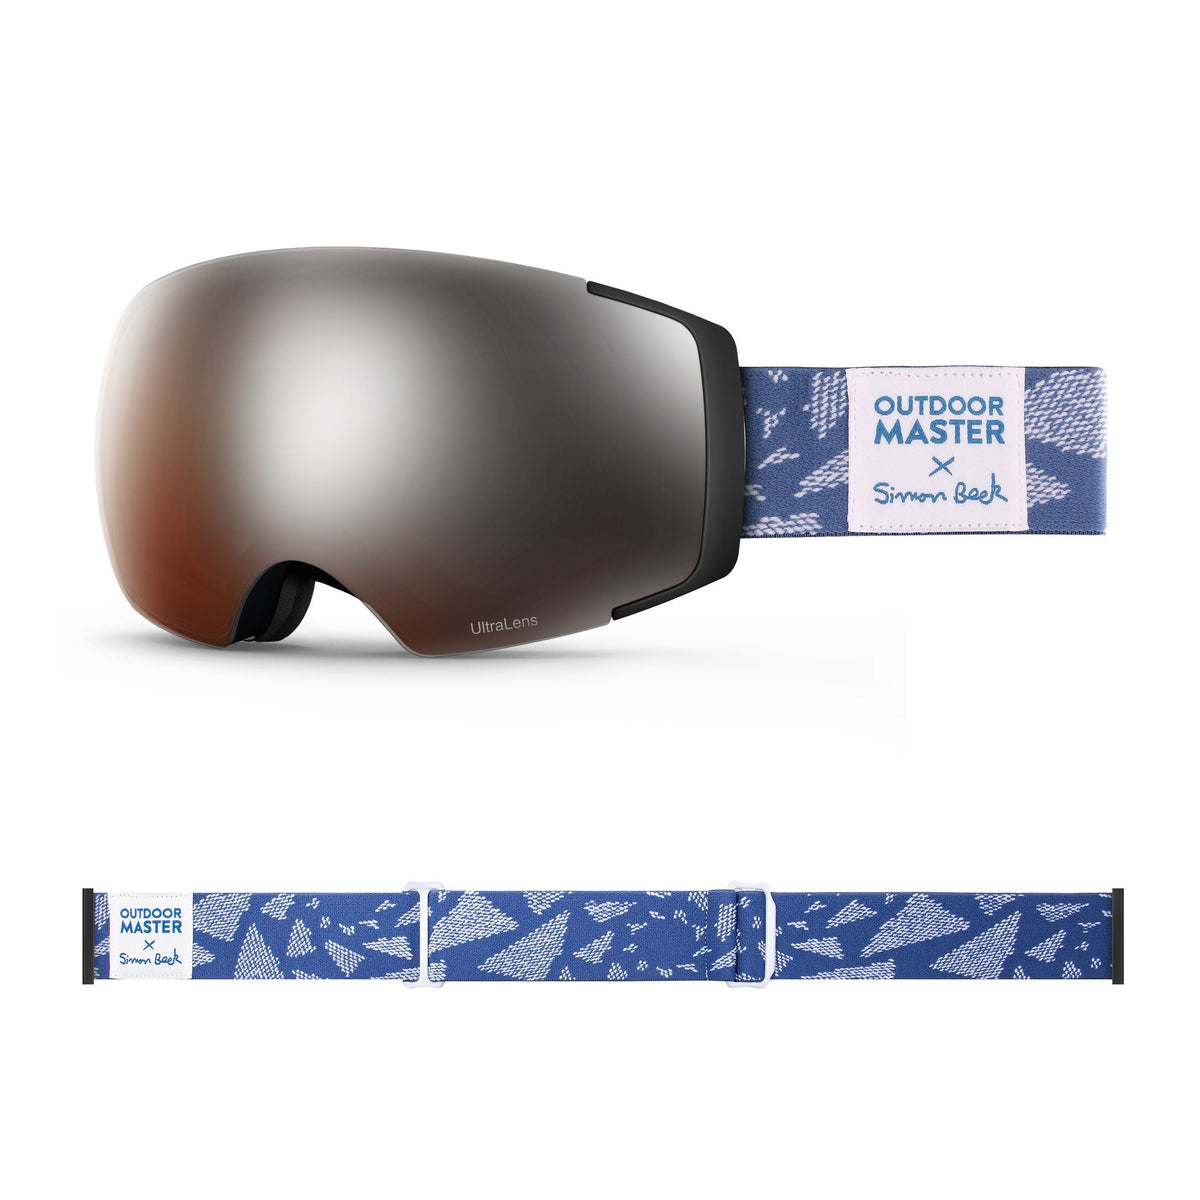 OutdoorMaster x Simon Beck Ski Goggles Pro Series - Snowshoeing Art Limited Edition OutdoorMaster LutraLens VLT 13% Optimized Orange with REVO Silver Flying Triangles